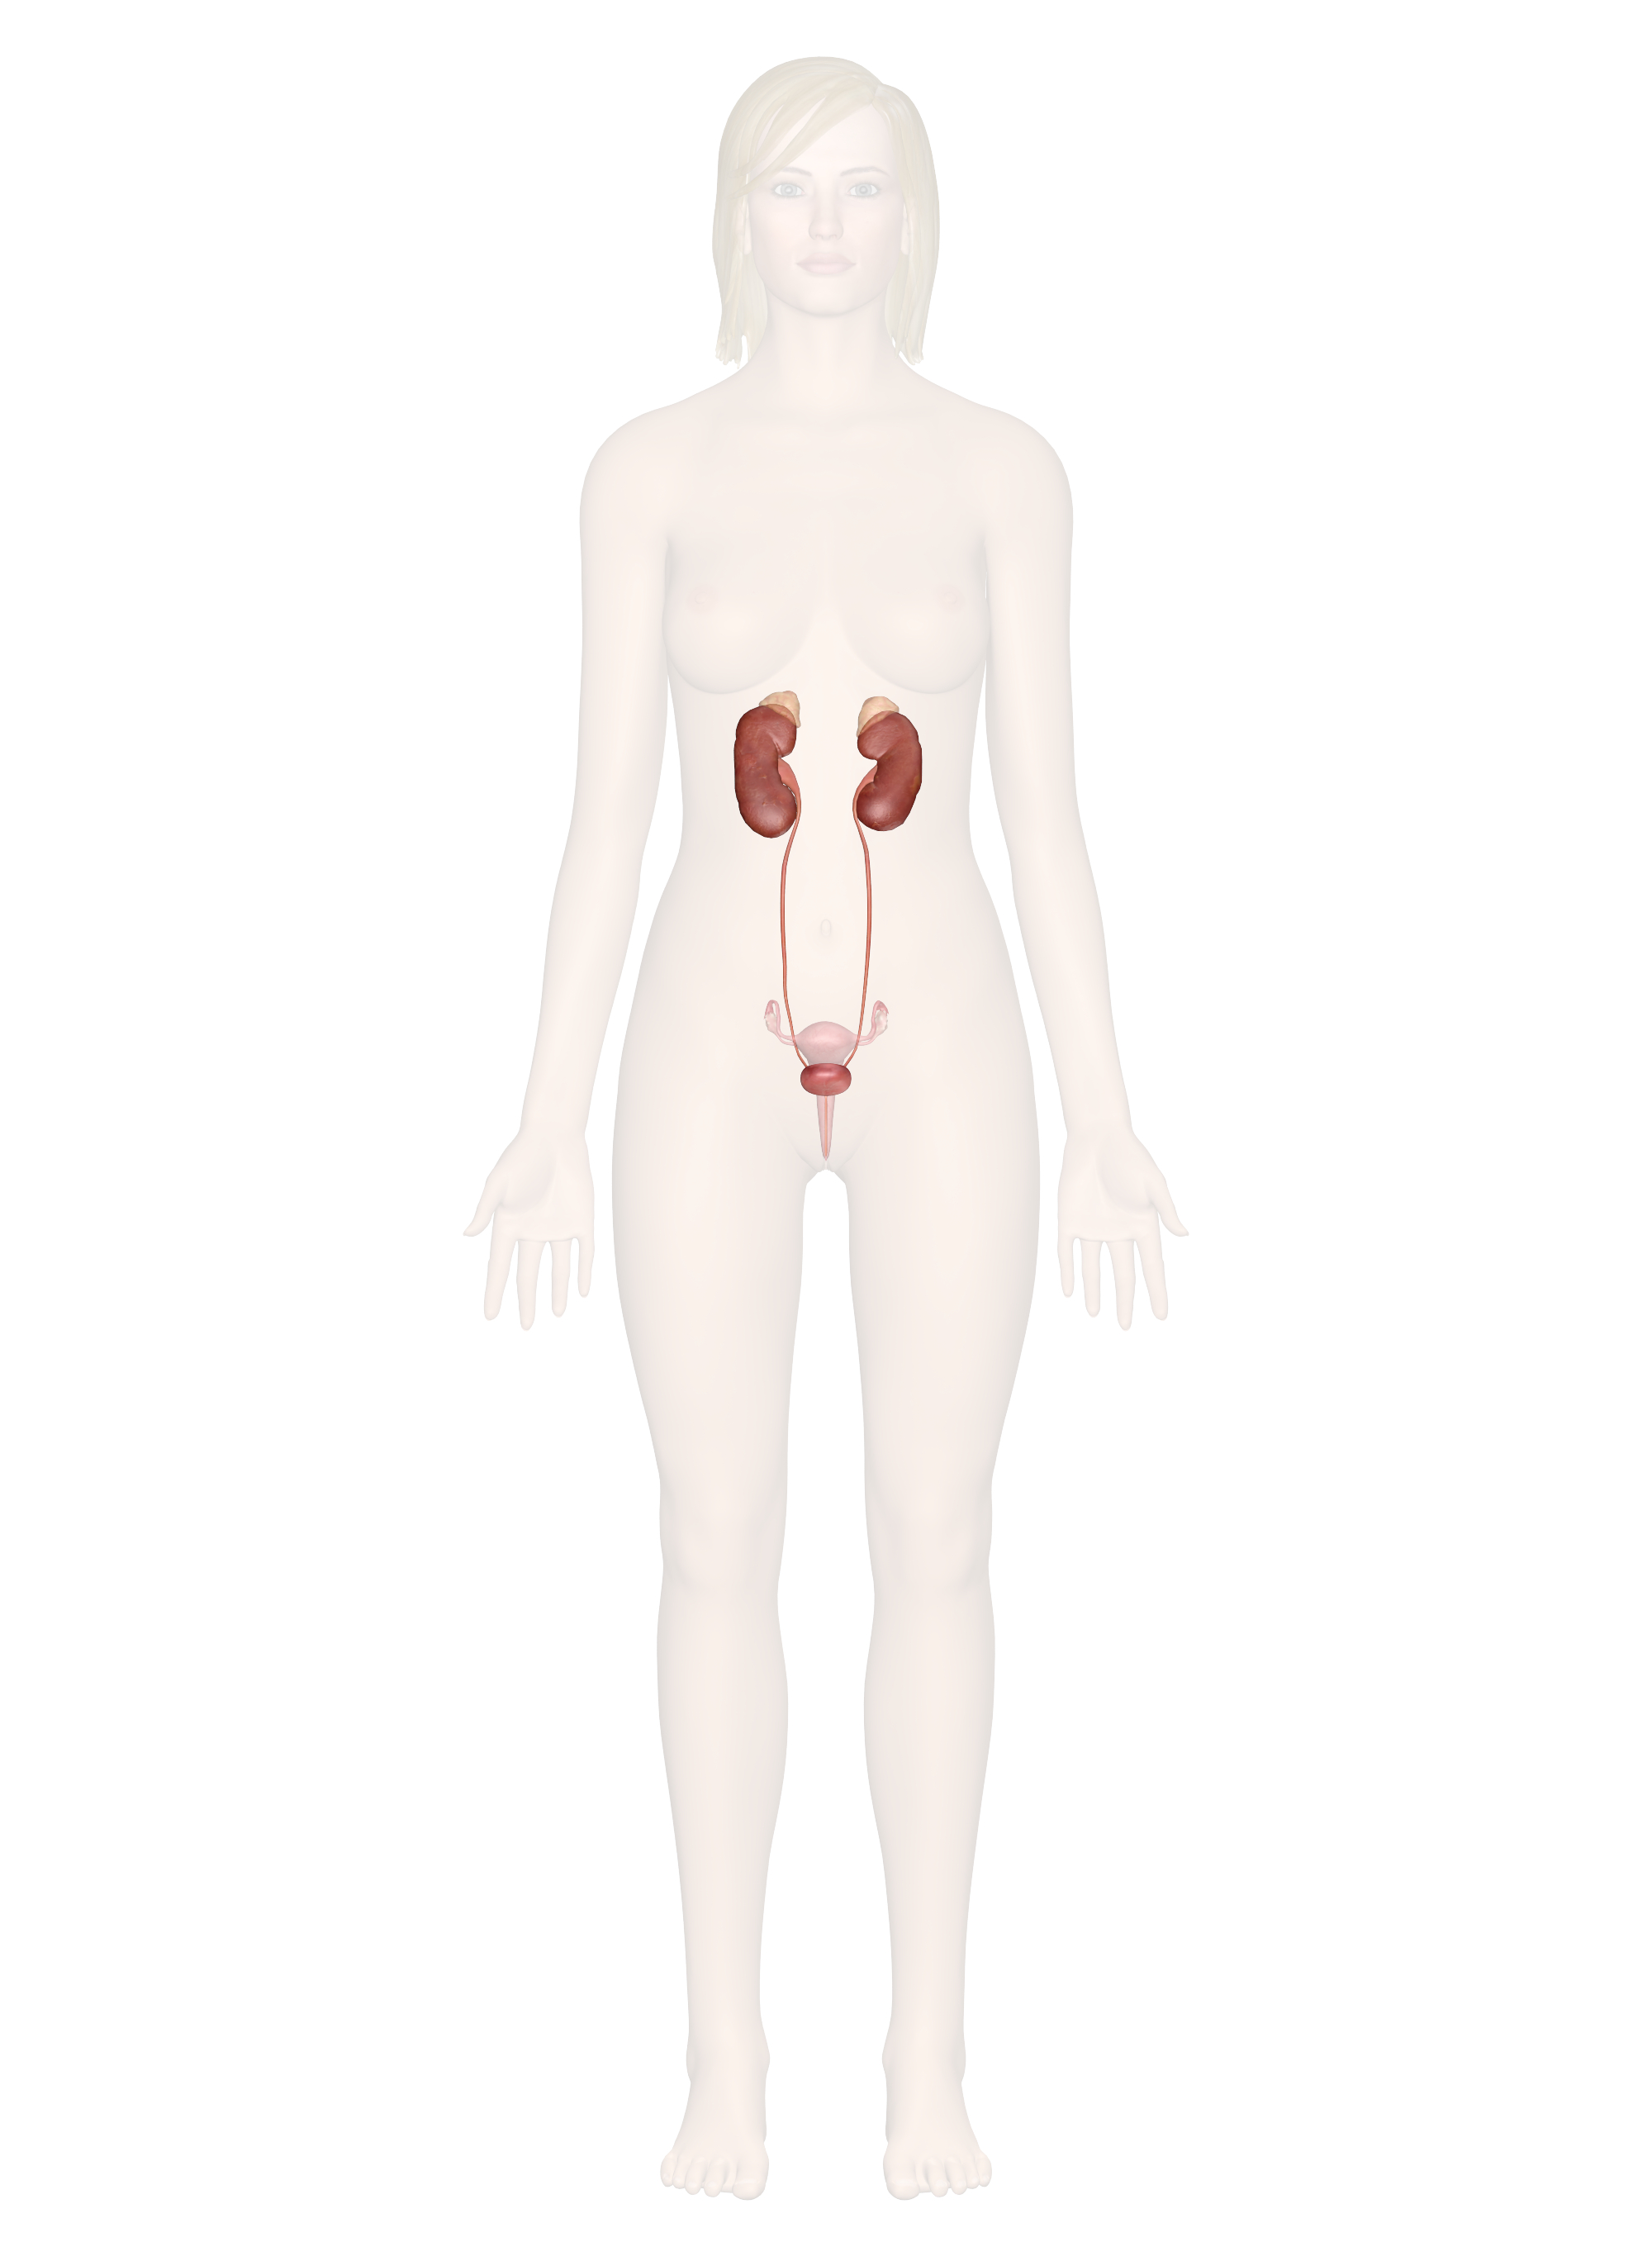 Urinary System Diagram Urinary System Anatomy And Physiology With Interactive Pictures